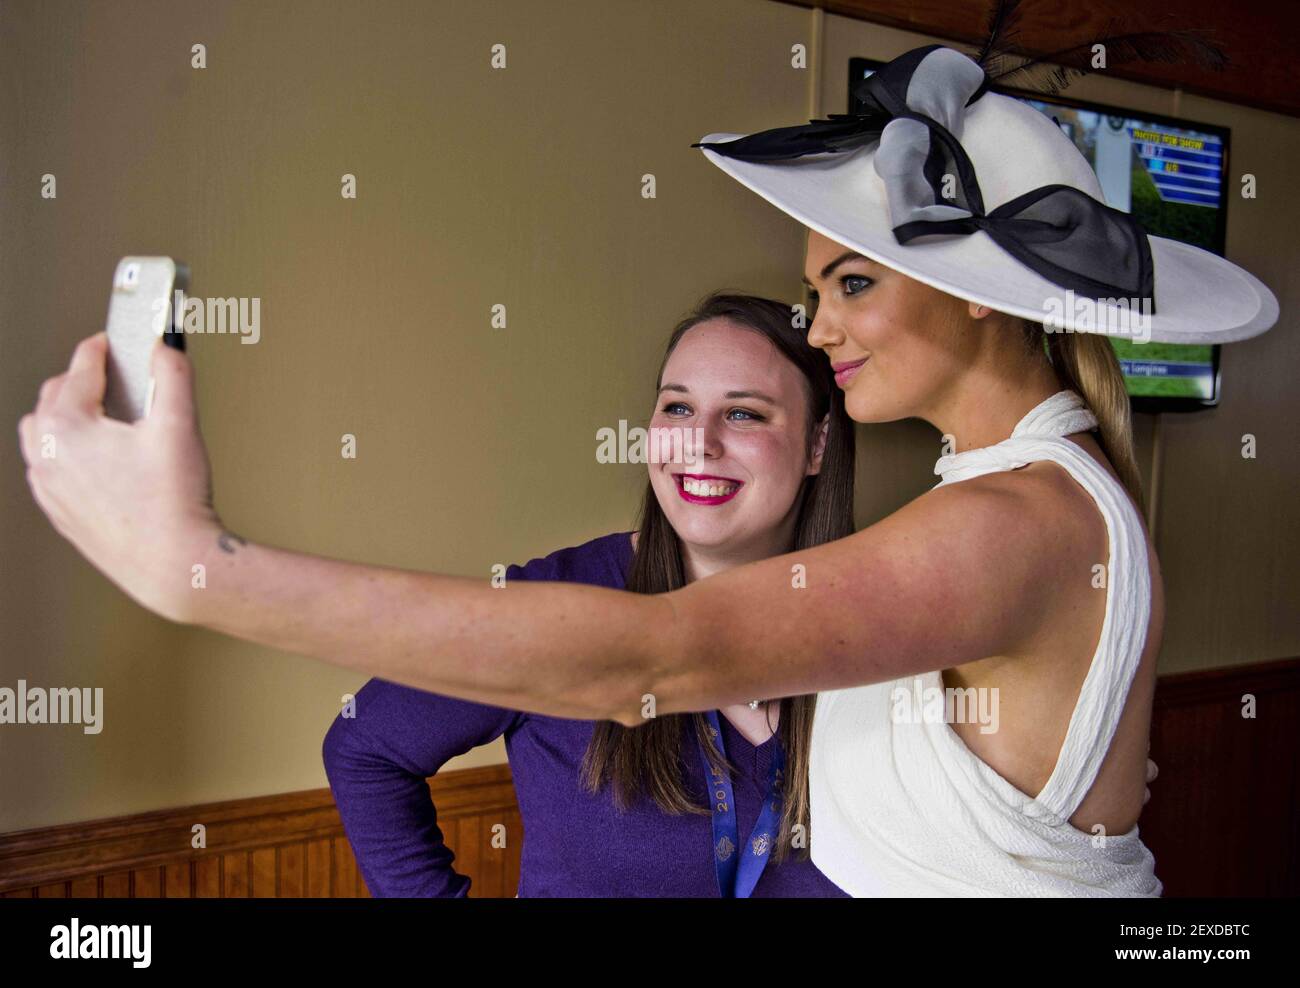 oct-31-2015-lexington-kentucky-us-october-31-2015-supermodel-kate-upton-takes-a-selfie-for-a-fan-at-the-breeders-cup-at-keeneland-race-course-in-lexington-kentucky-scott-serioeswcsm-please-use-credit-from-credit-field-2EXDBTC.jpg